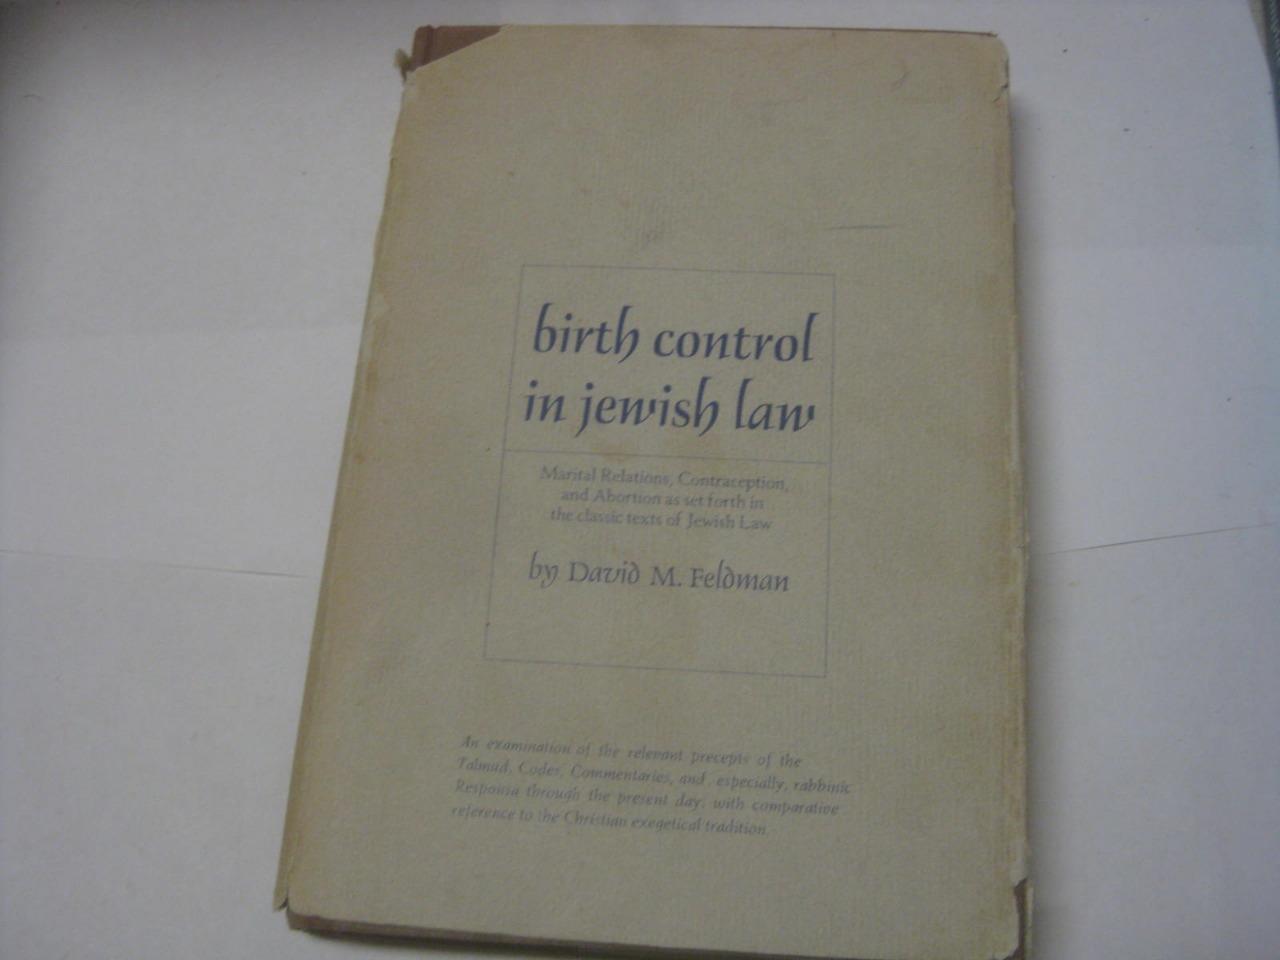 Birth Control in Jewish Law Marital Relations, Contraception, and Abortion ...